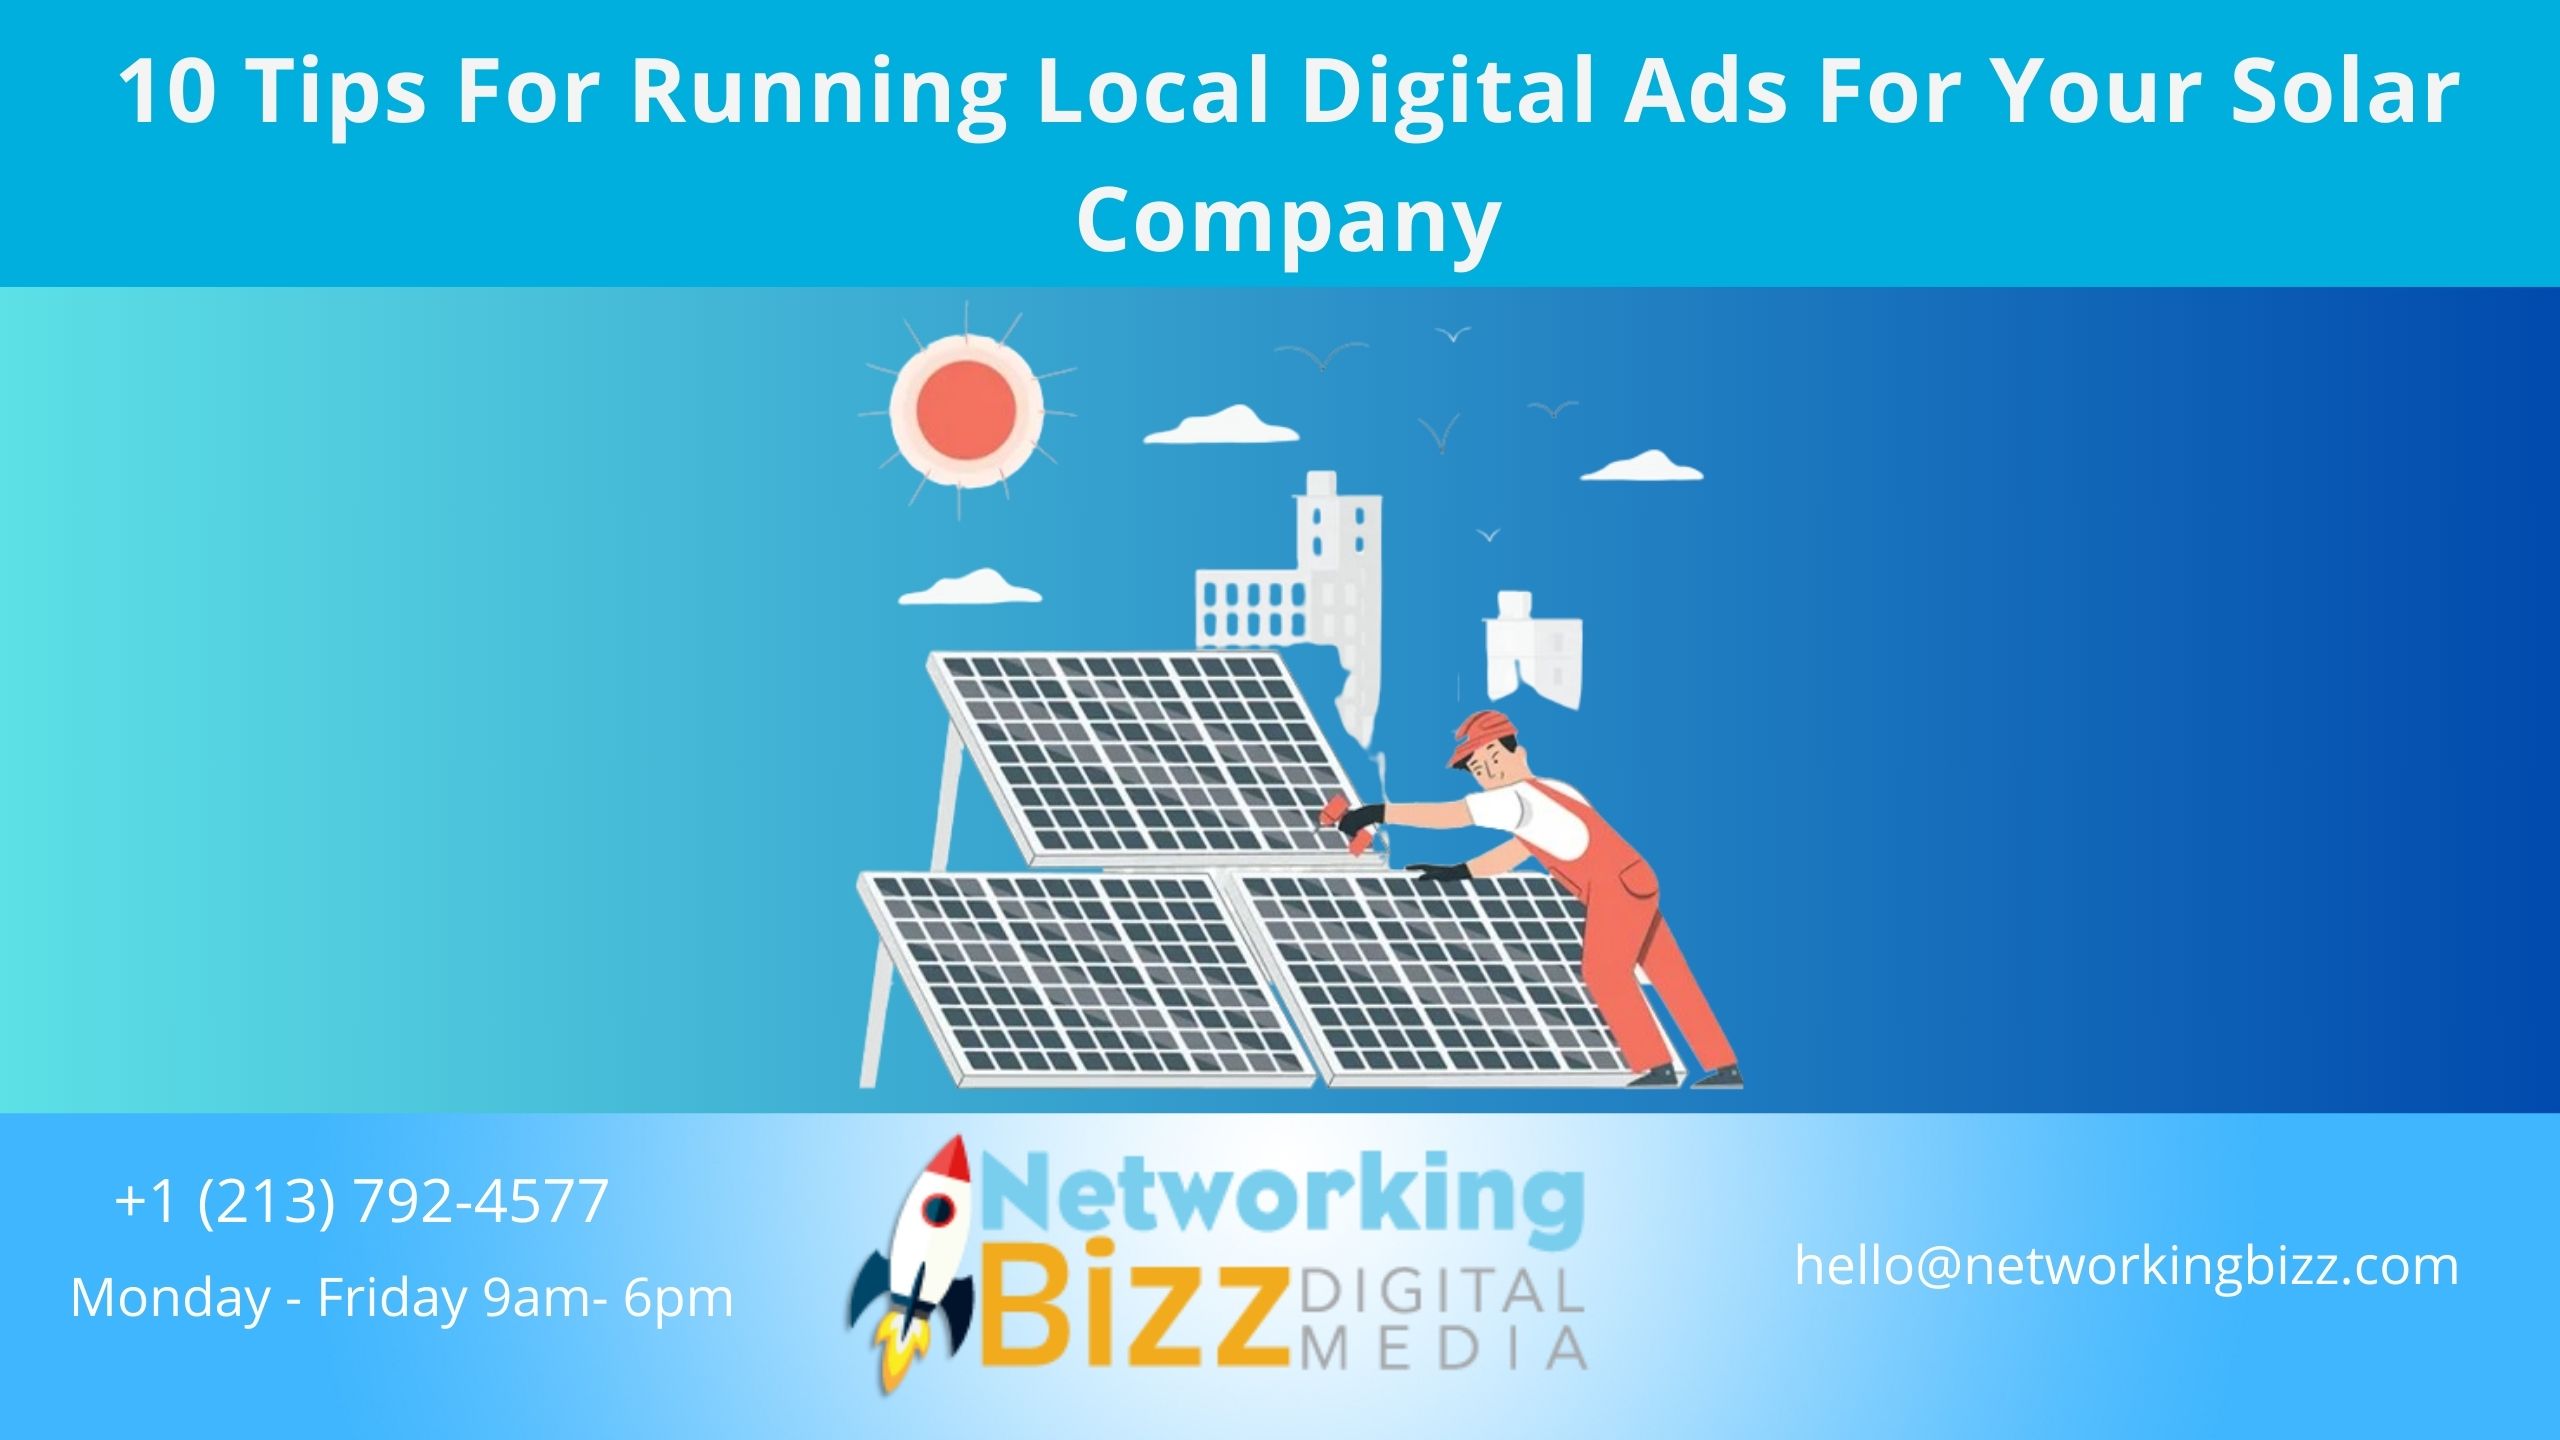 10 Tips For Running Local Digital Ads For Your Solar Company